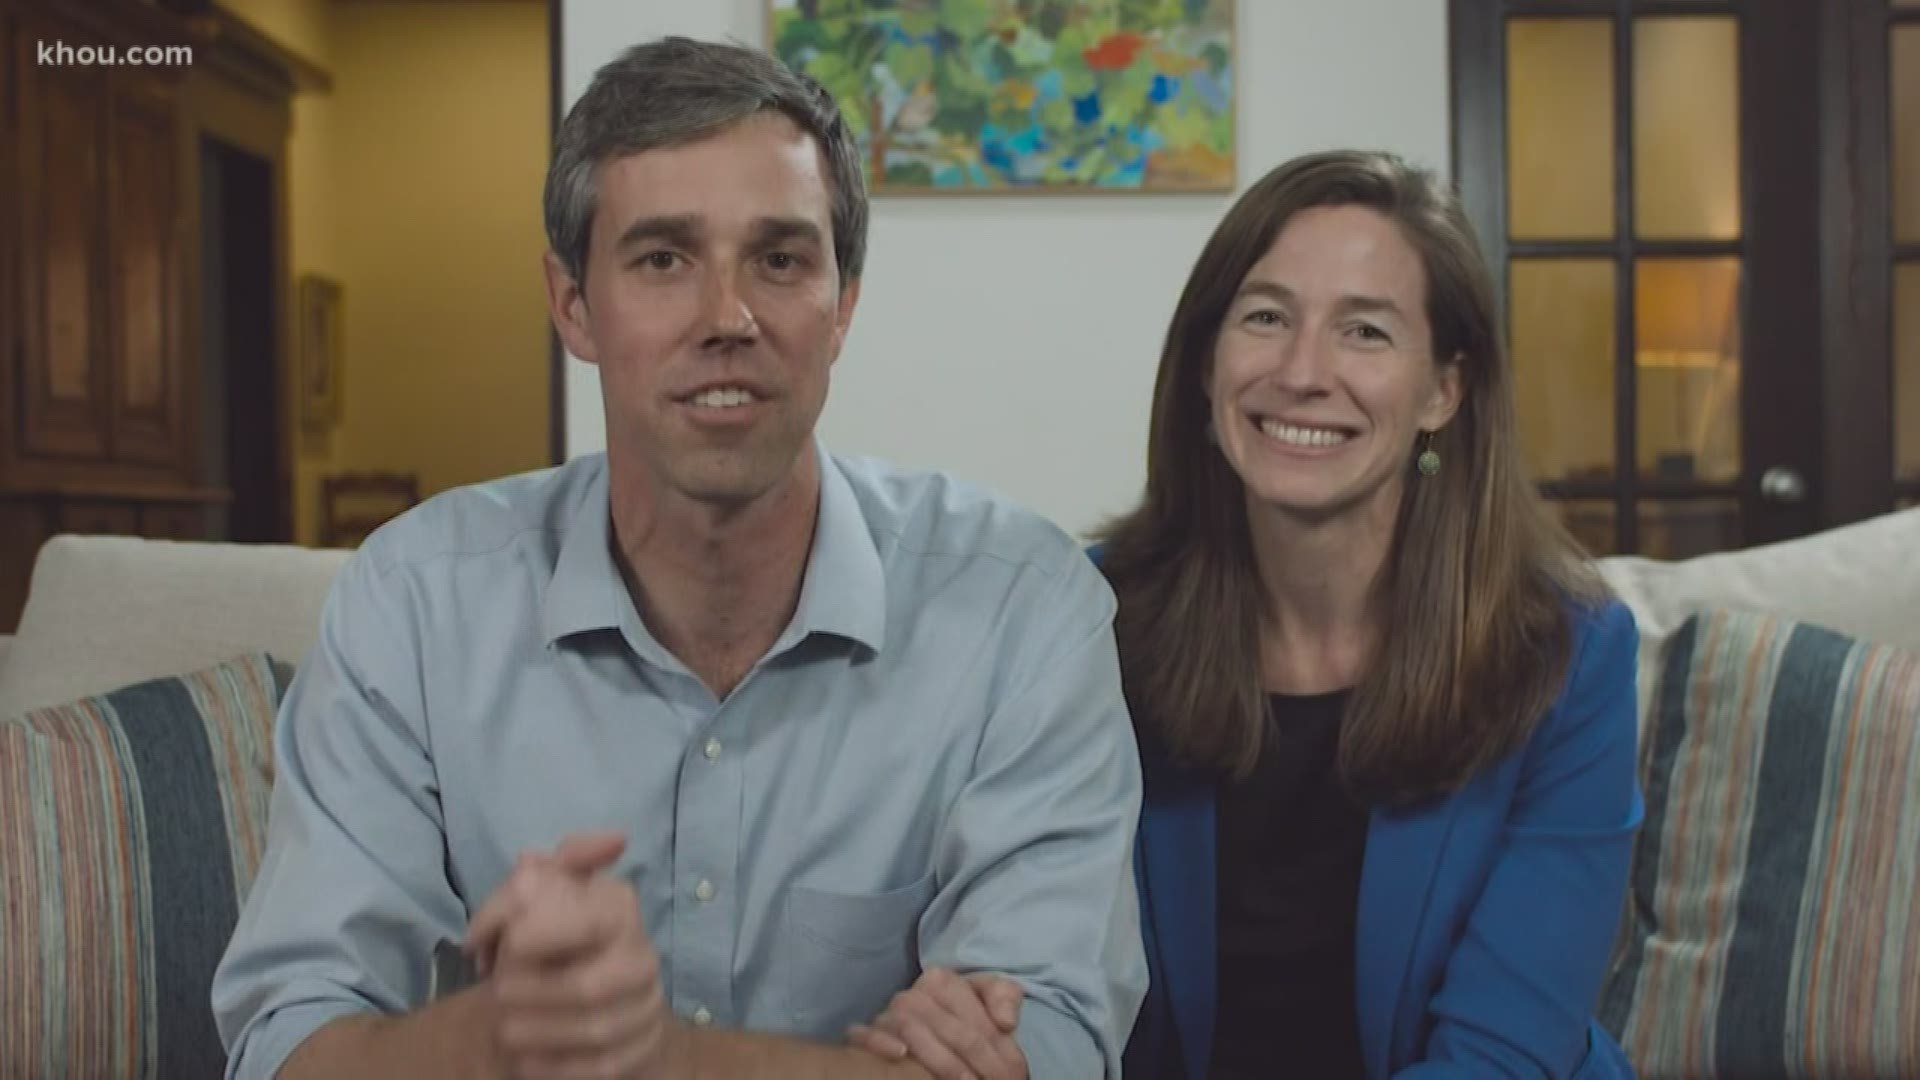 Former Texas Rep. Beto O’Rourke formally announced Thursday that he’ll seek the 2020 Democratic presidential nomination, ending months of intense speculation over whether he’d try to translate his newfound political celebrity into a White House bid.